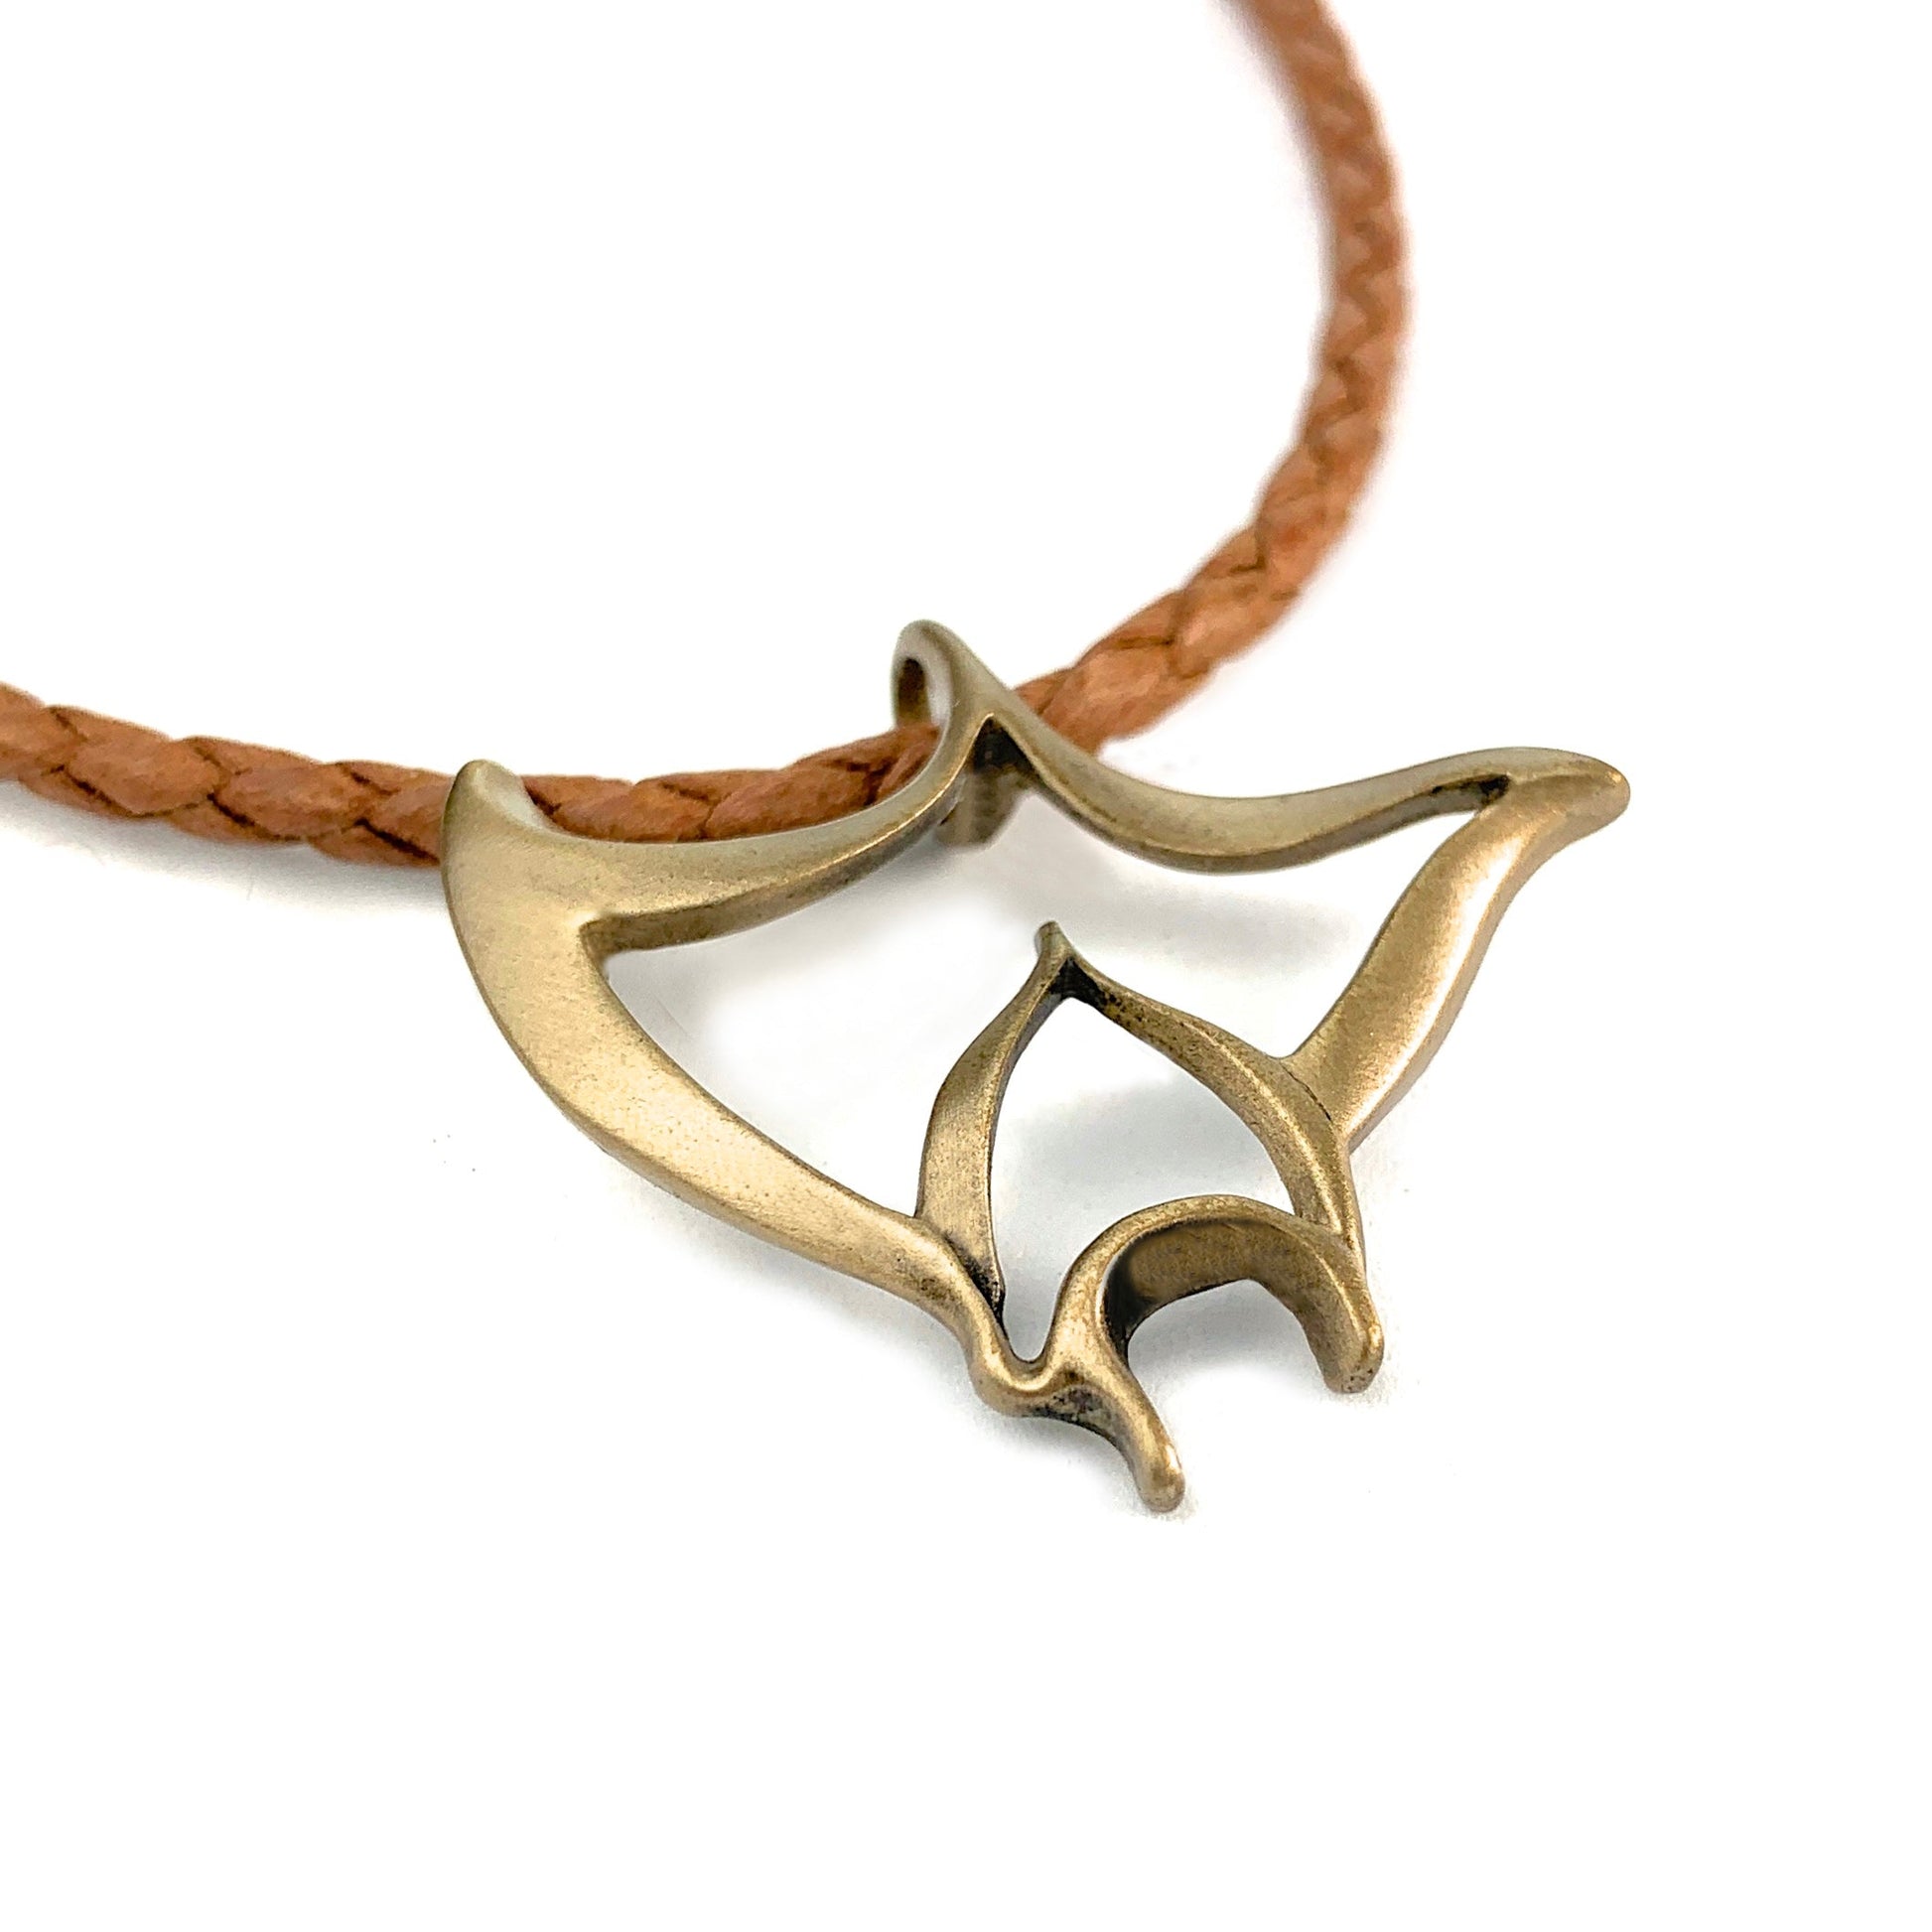 Manta Ray Necklace for Women and Men- Bronze Stingray Necklace for Women, Bronze Stingray Pendant, Stingray Jewelry, Manta Ray Pendant, Scuba Jewelry - The Tool Store